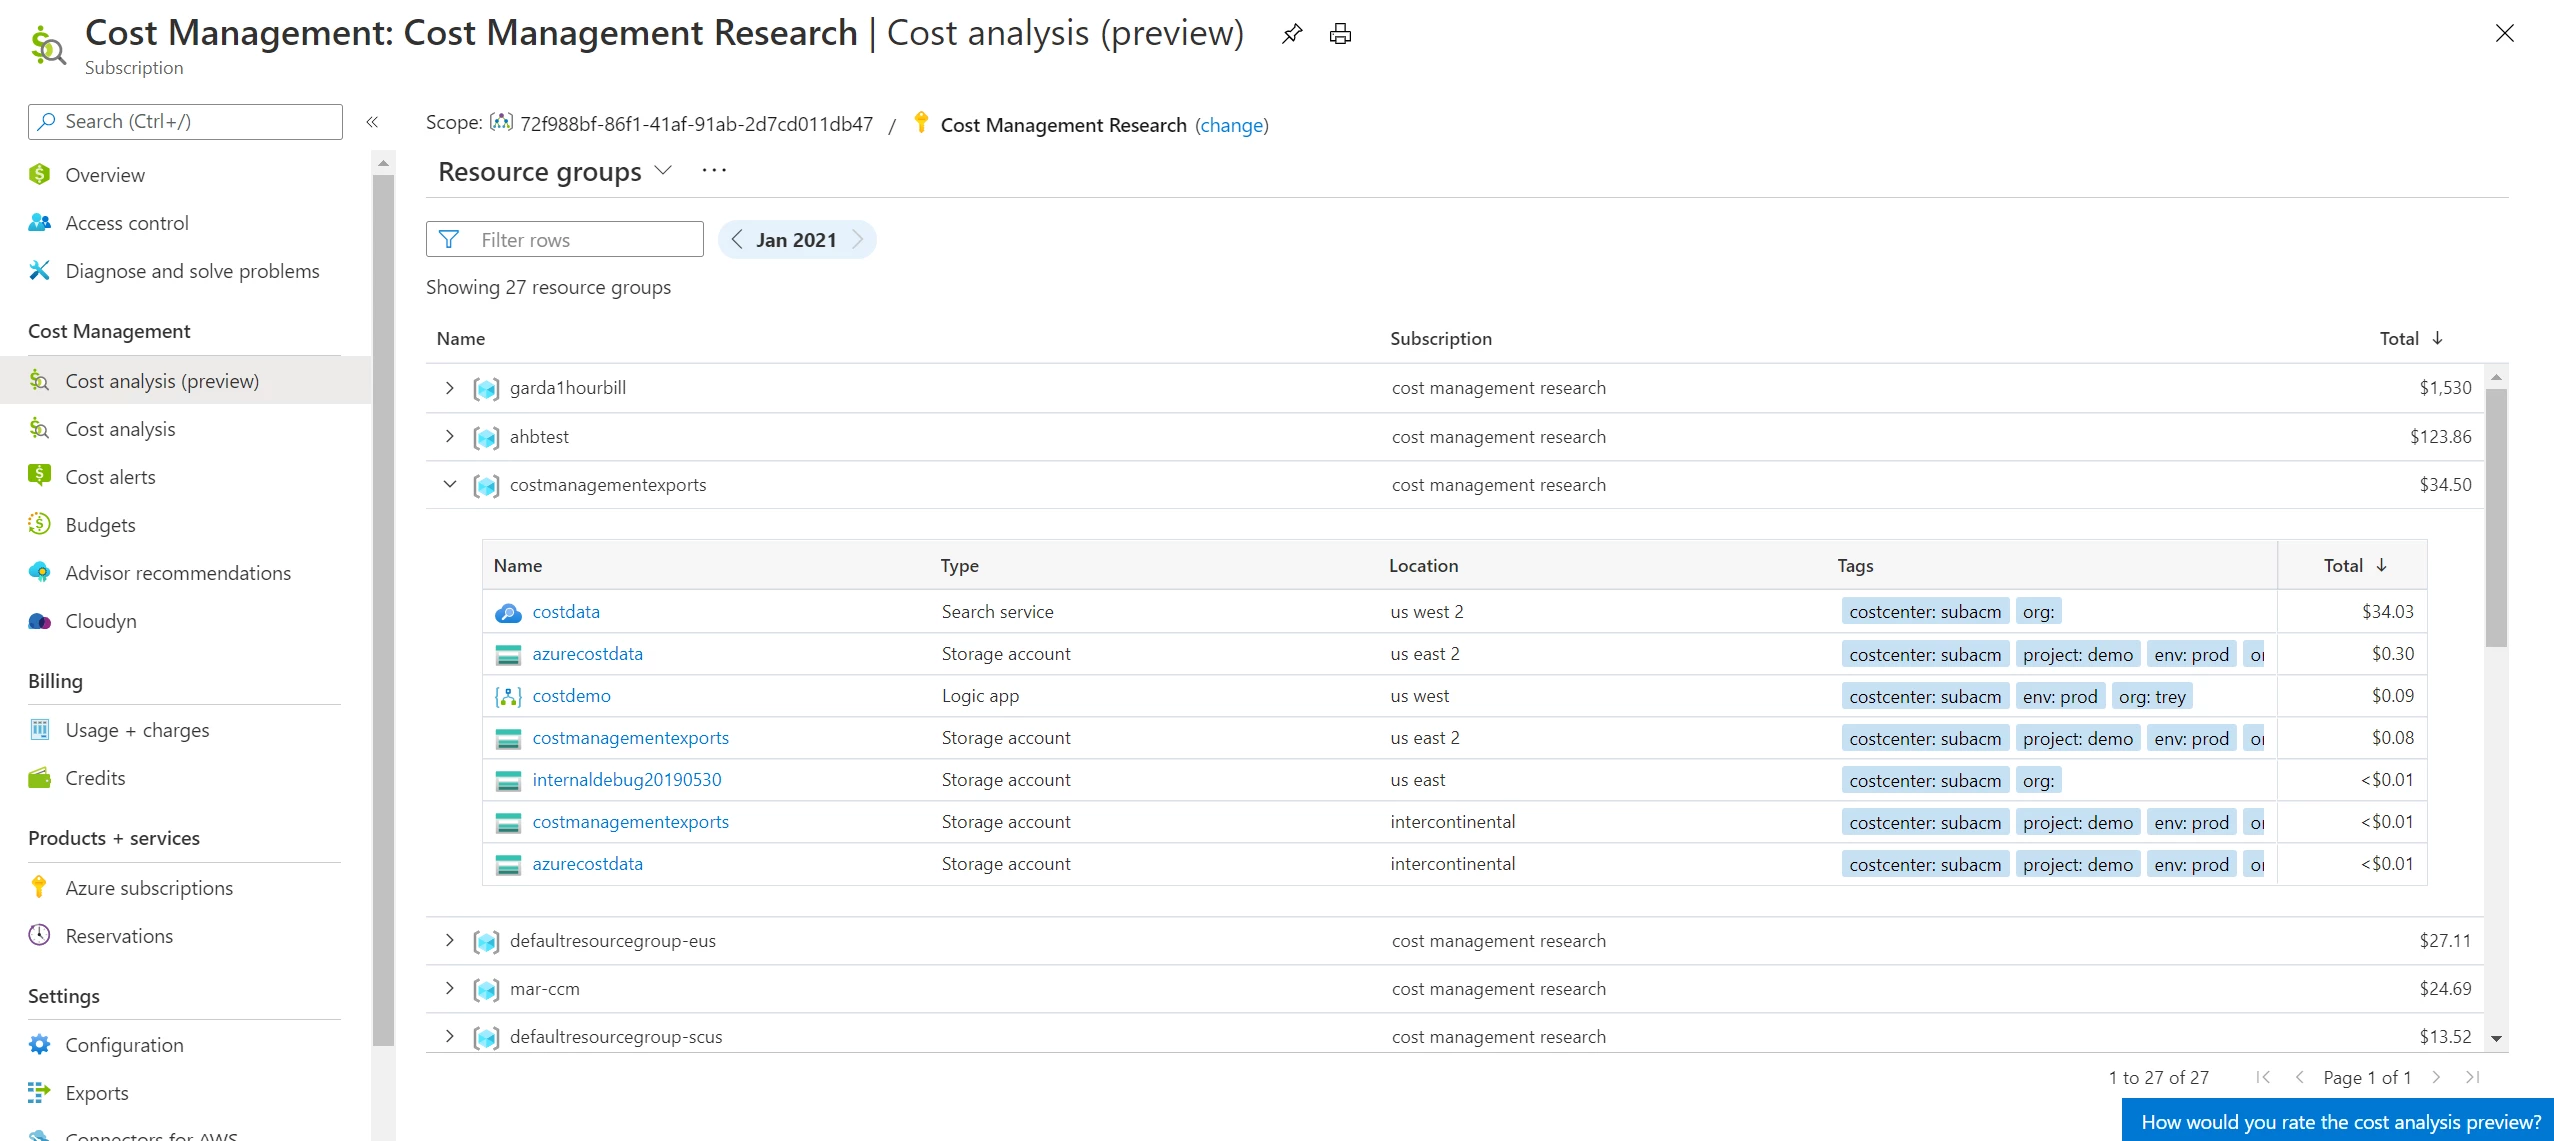 New Resource groups view in the cost analysis preview